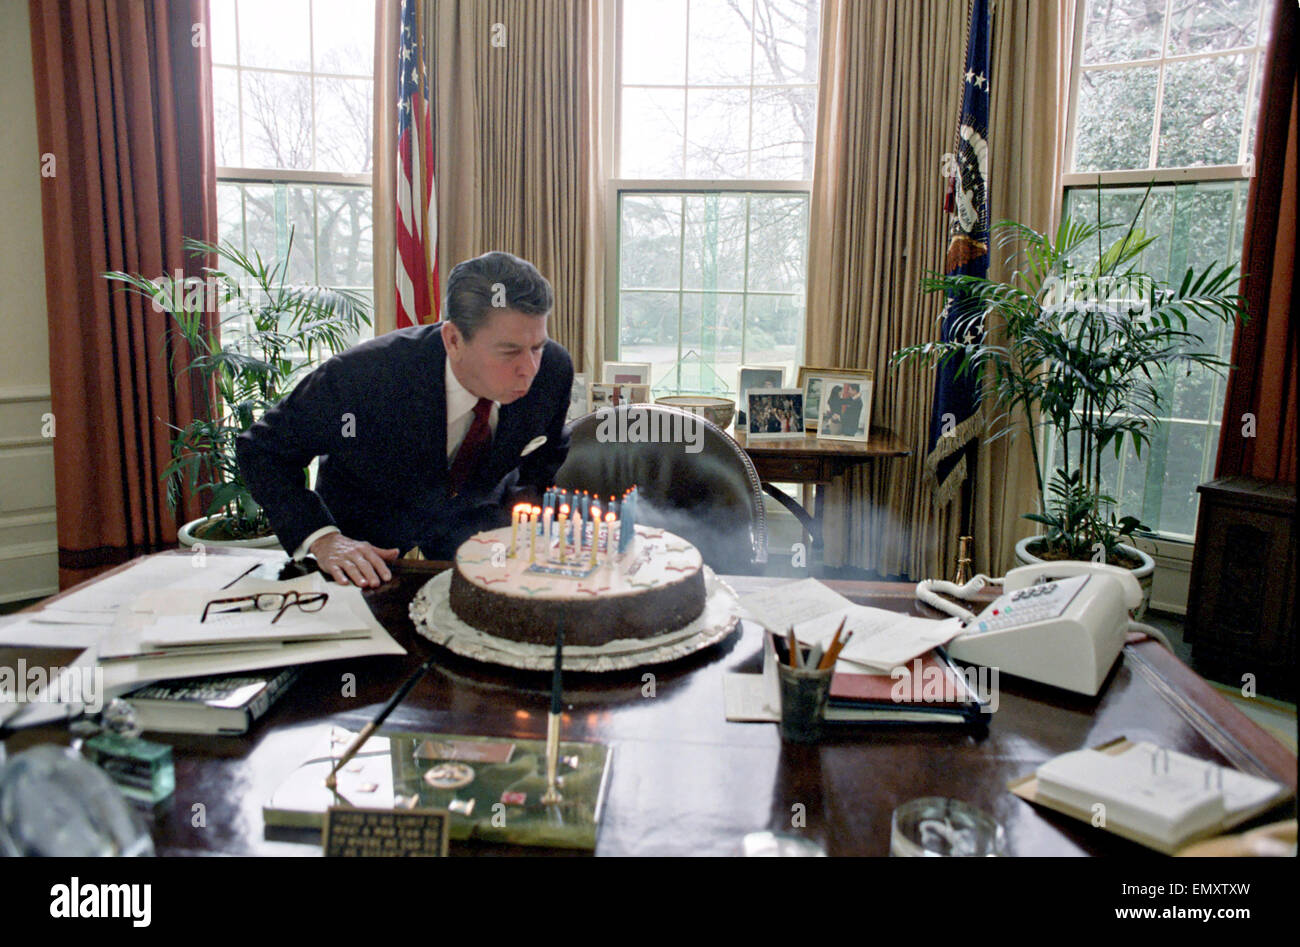 US President Ronald Reagan blows out candles on cake while celebrating his birthday party in the Oval Office of the White House February 5, 1982 in Washington, DC. Stock Photo